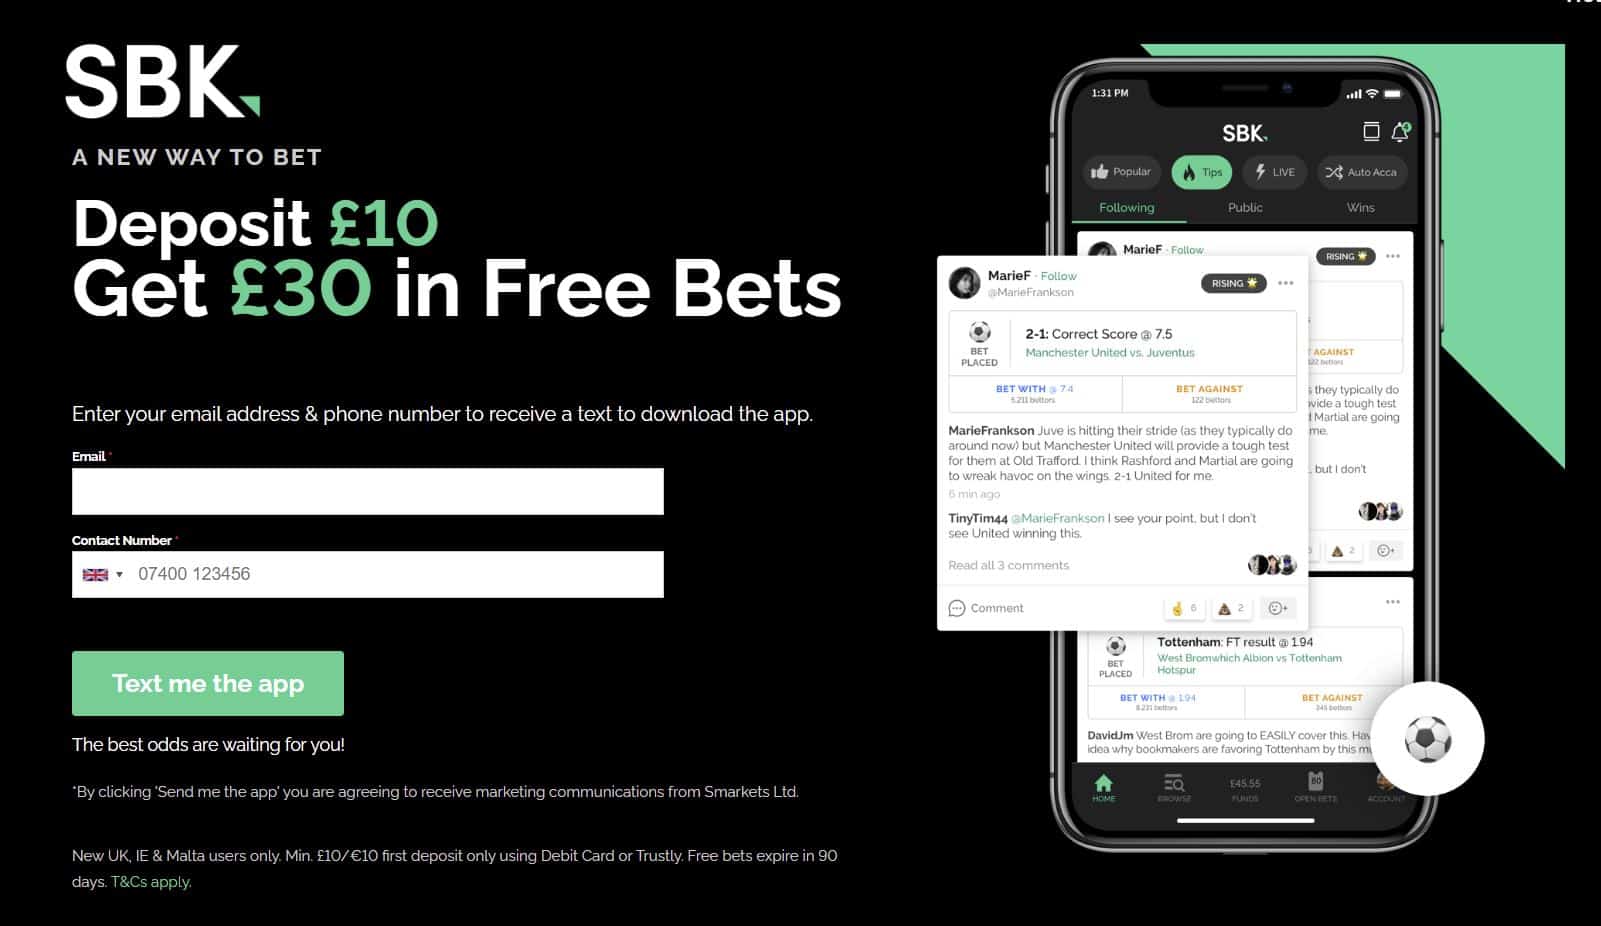 SBK £30 free bets offers